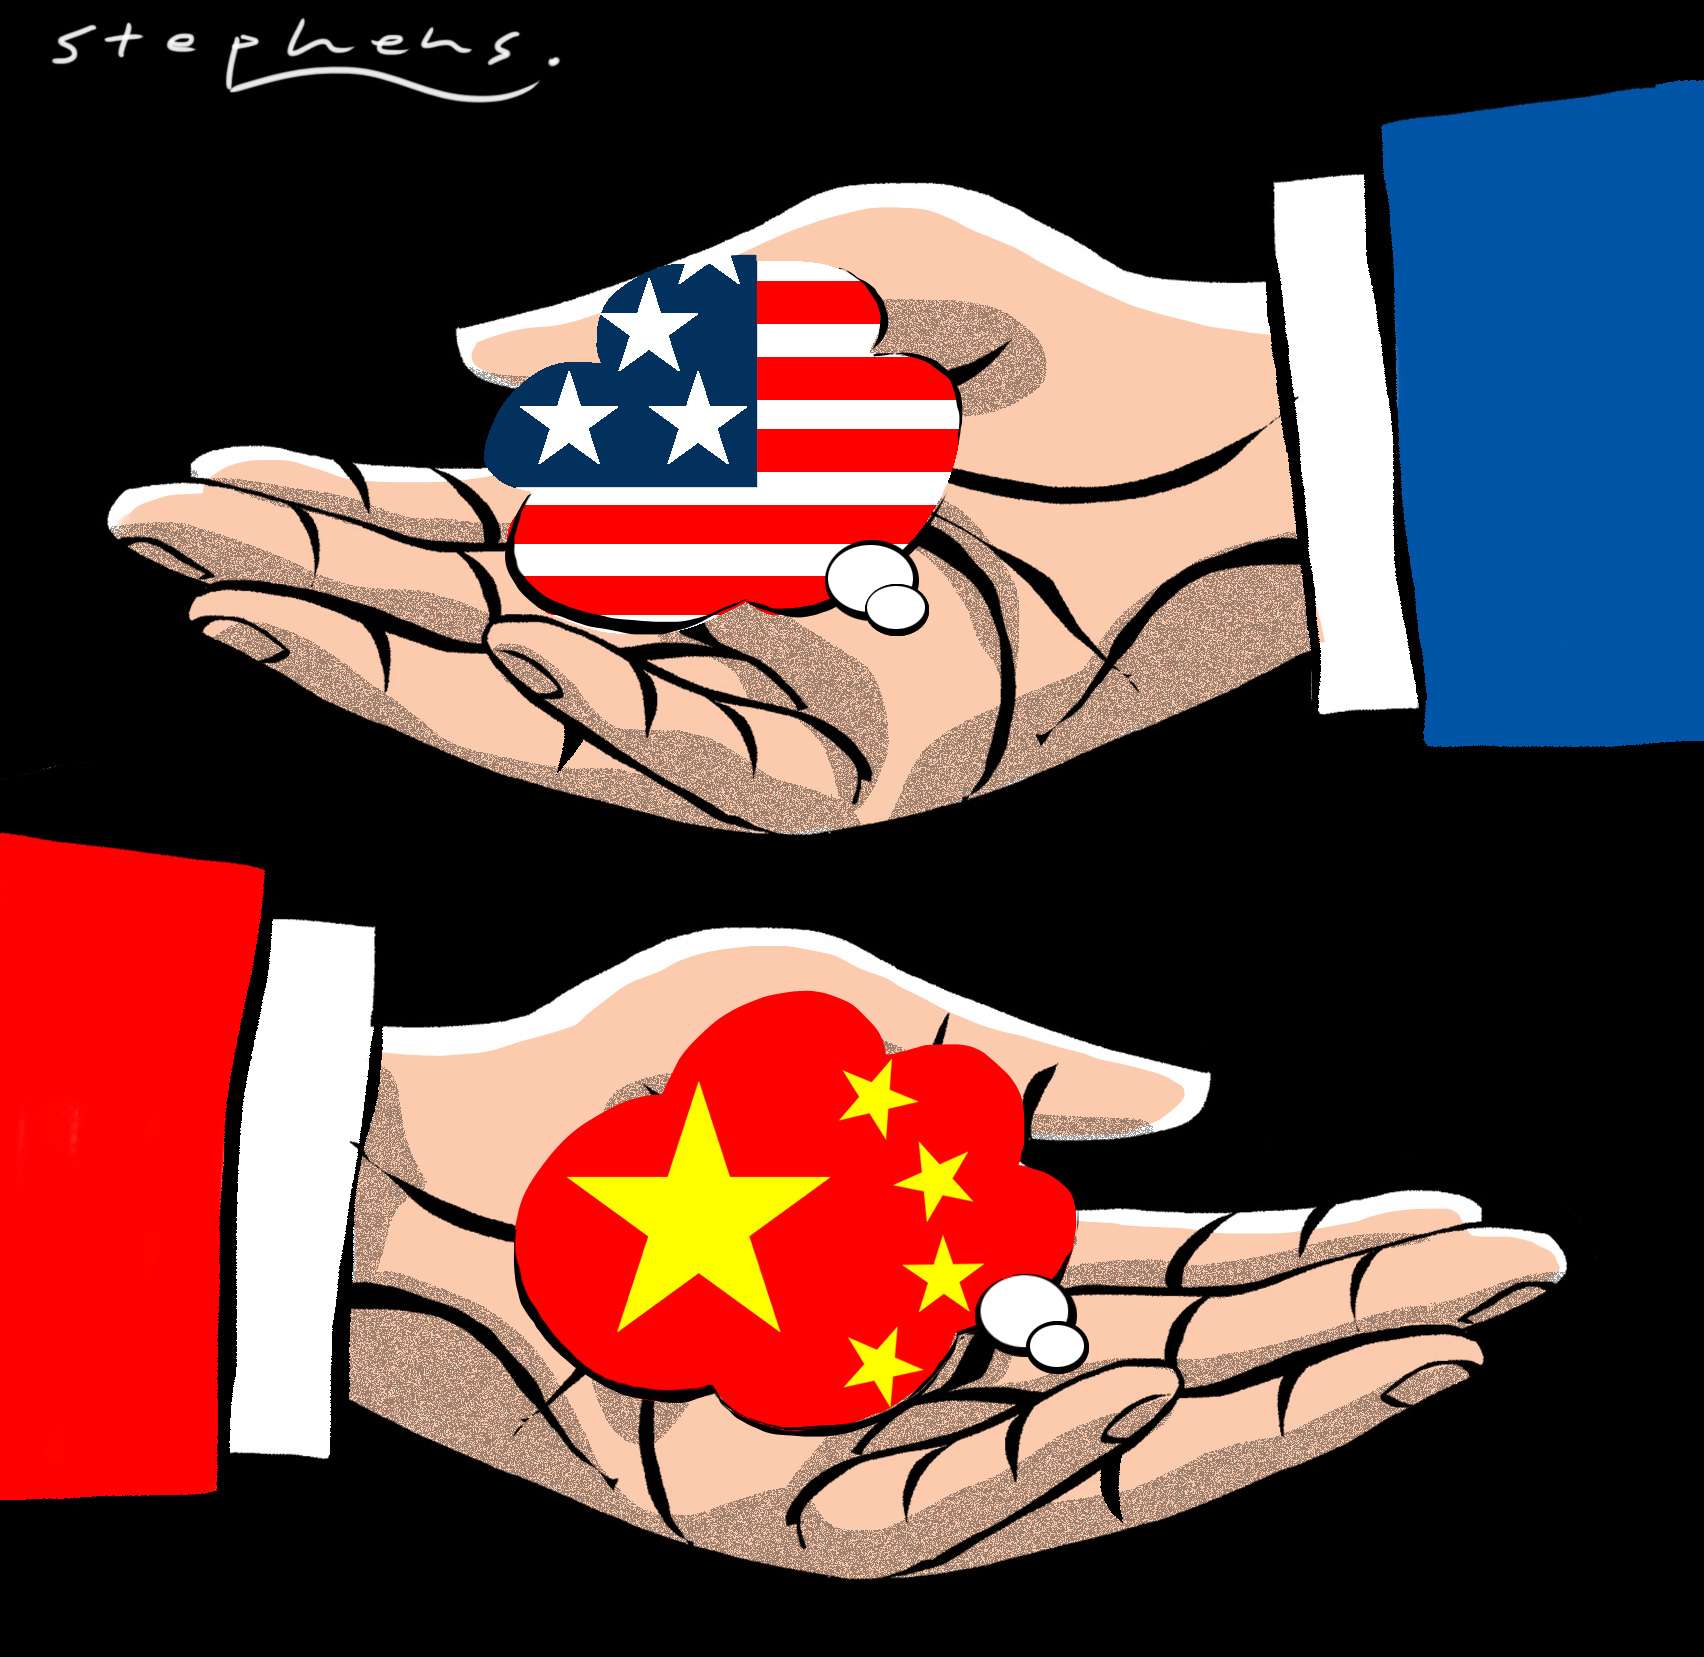 Patrick Mendis and Sheng Cui say the Sino-US trade partnership is the cornerstone of global peace and prosperity, and ask whether the two nations can take a lesson in wisdom from history to secure the future of humanity